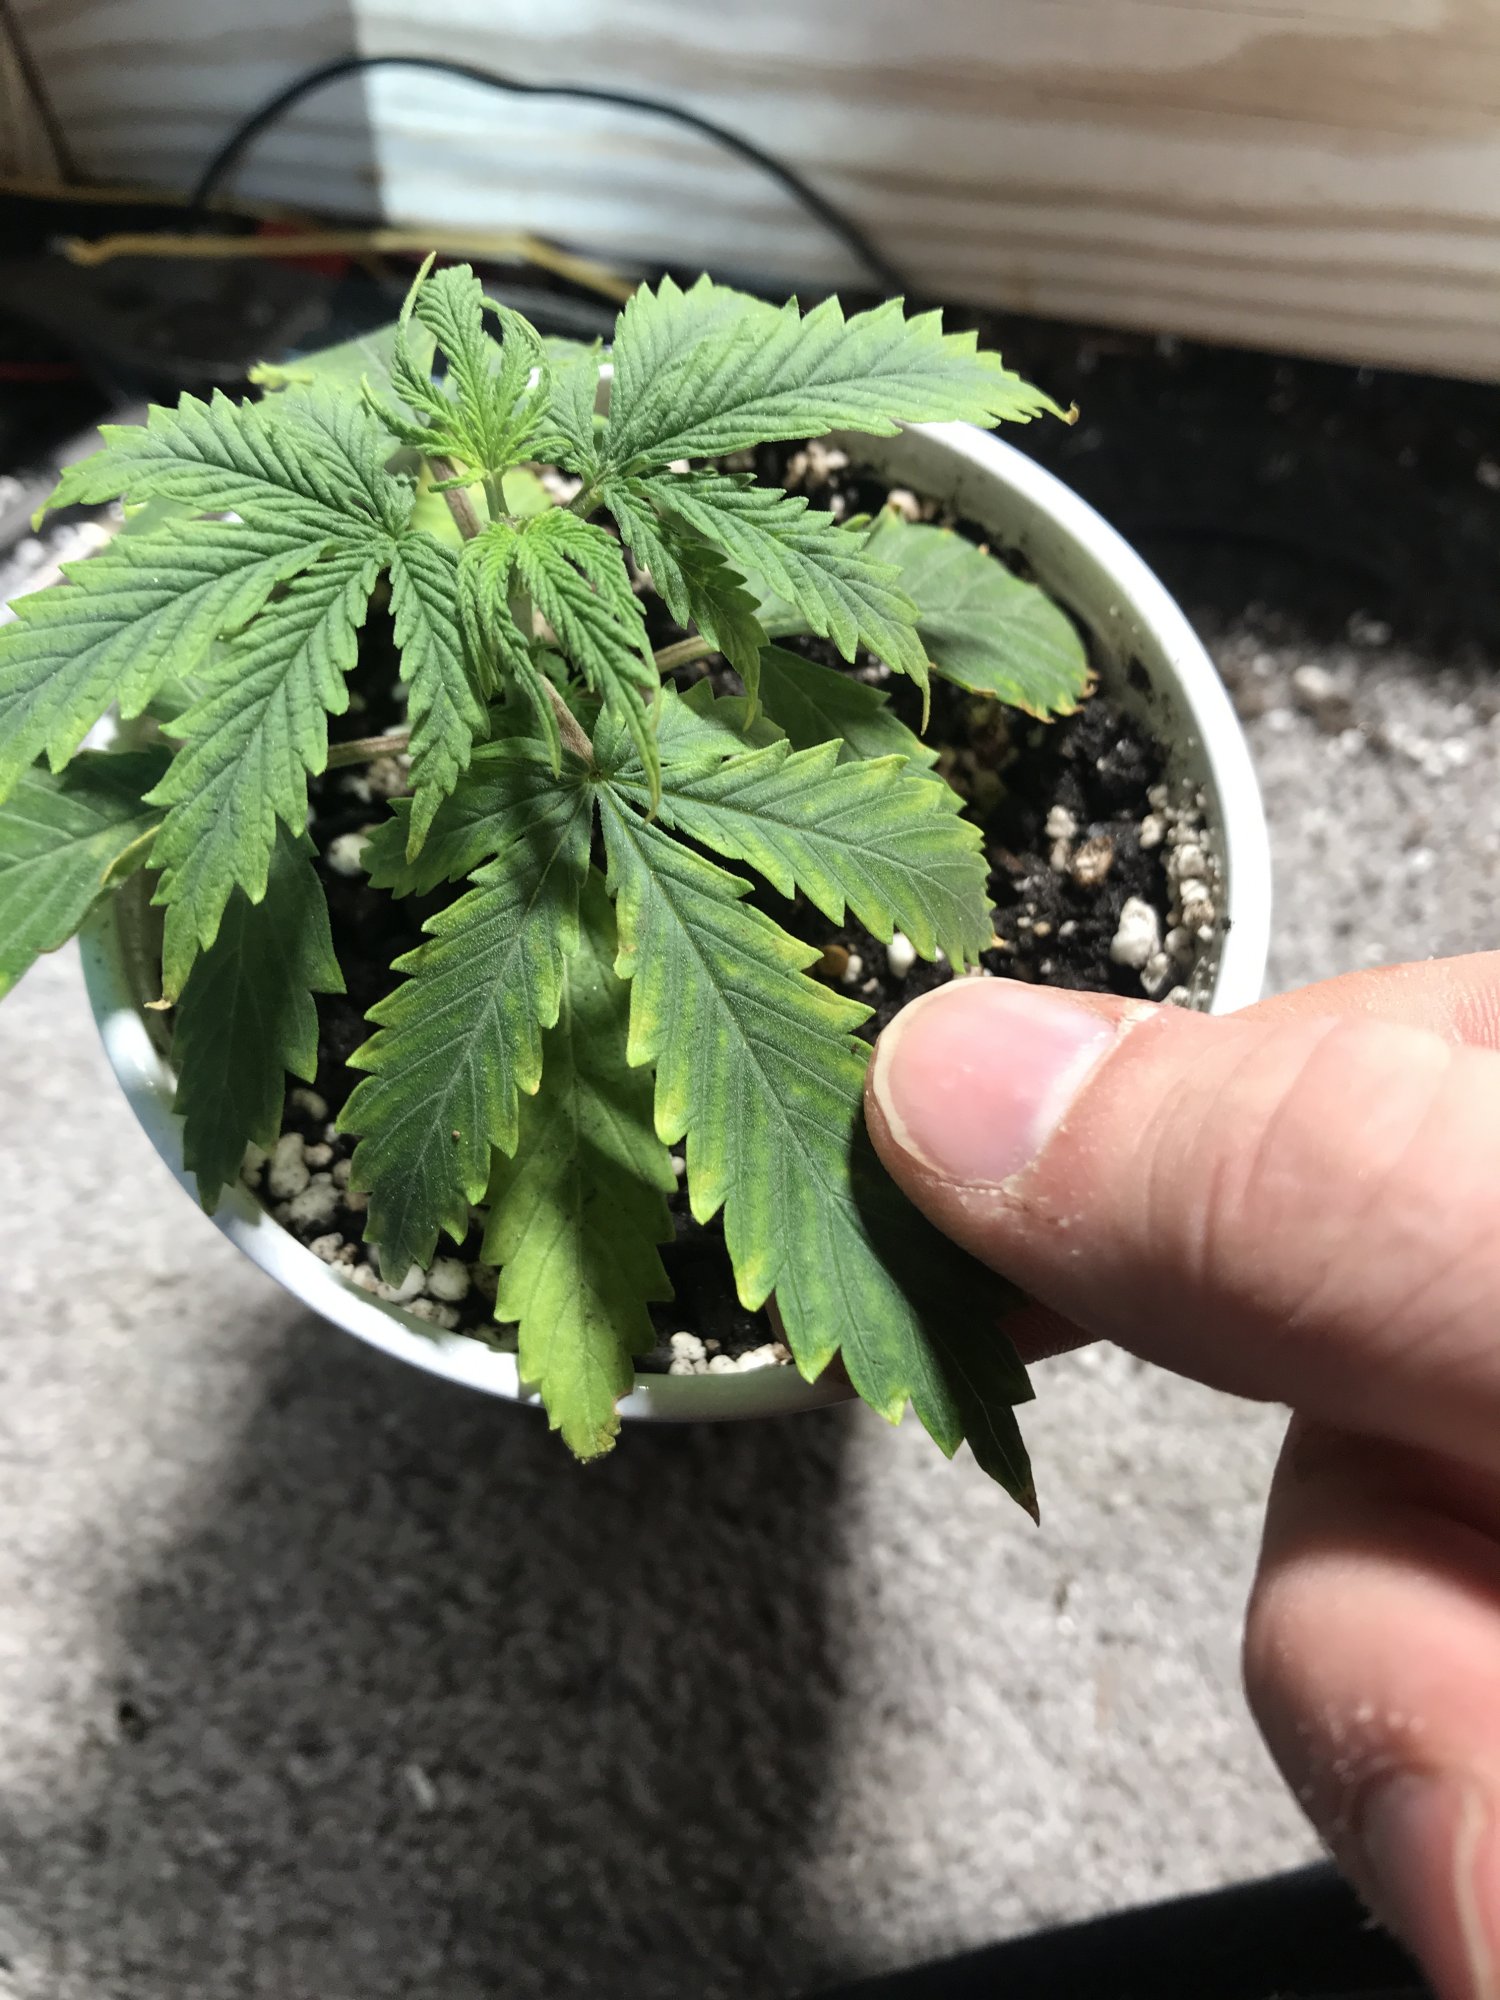 Can some one tell me what is wrong with my plant 3